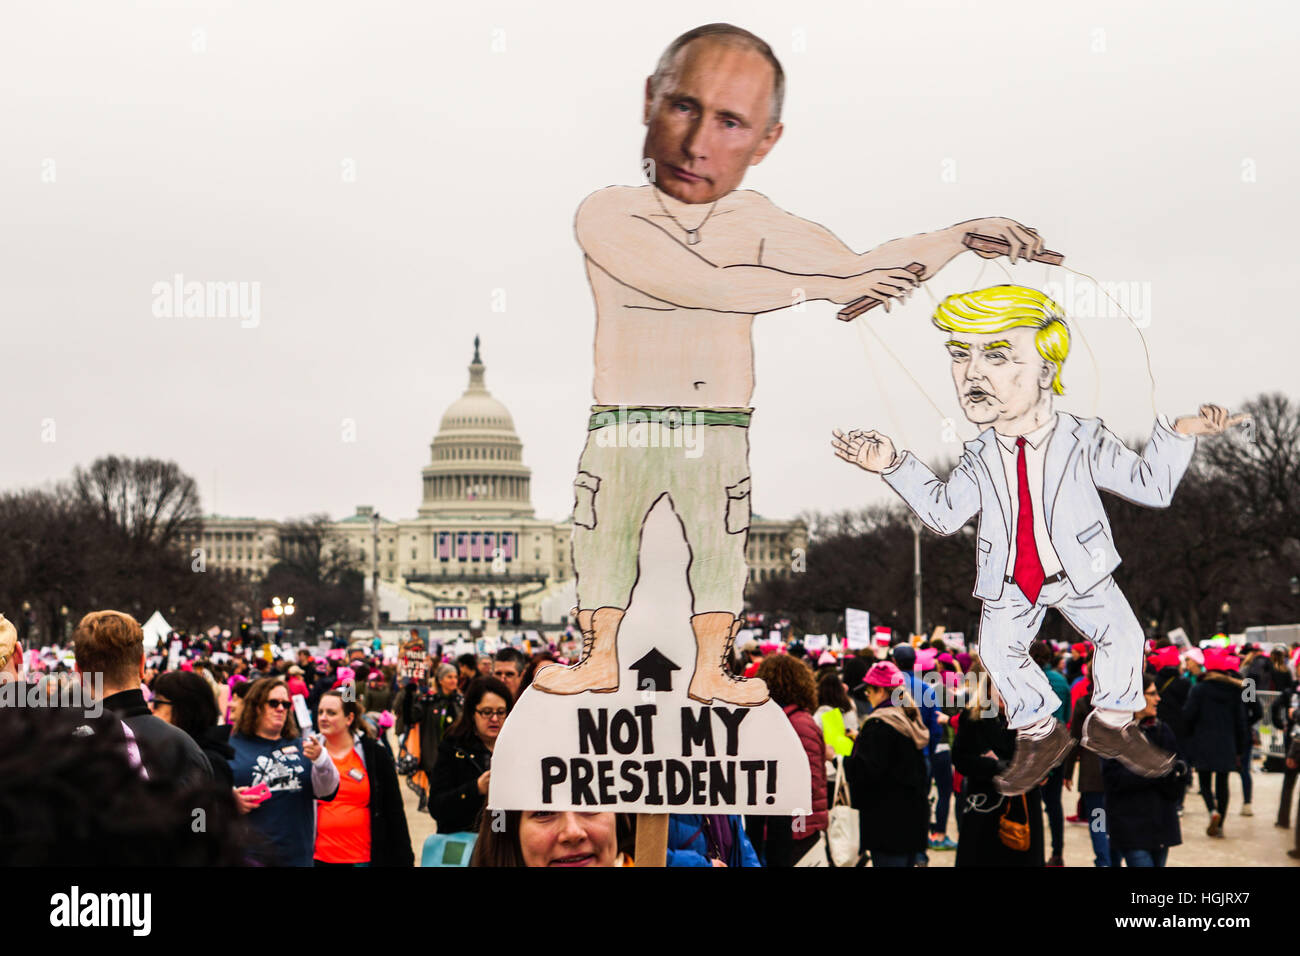 Washington, DC, USA. 21st Jan, 2017. A protestor holds an anti-Putin and anti-Trump signs during the Women's March on Washington in Washington, DC.  with the U.S. Capitol in the background. Large crowds attended the anti-Trump rally the day after the U.S. Stock Photo